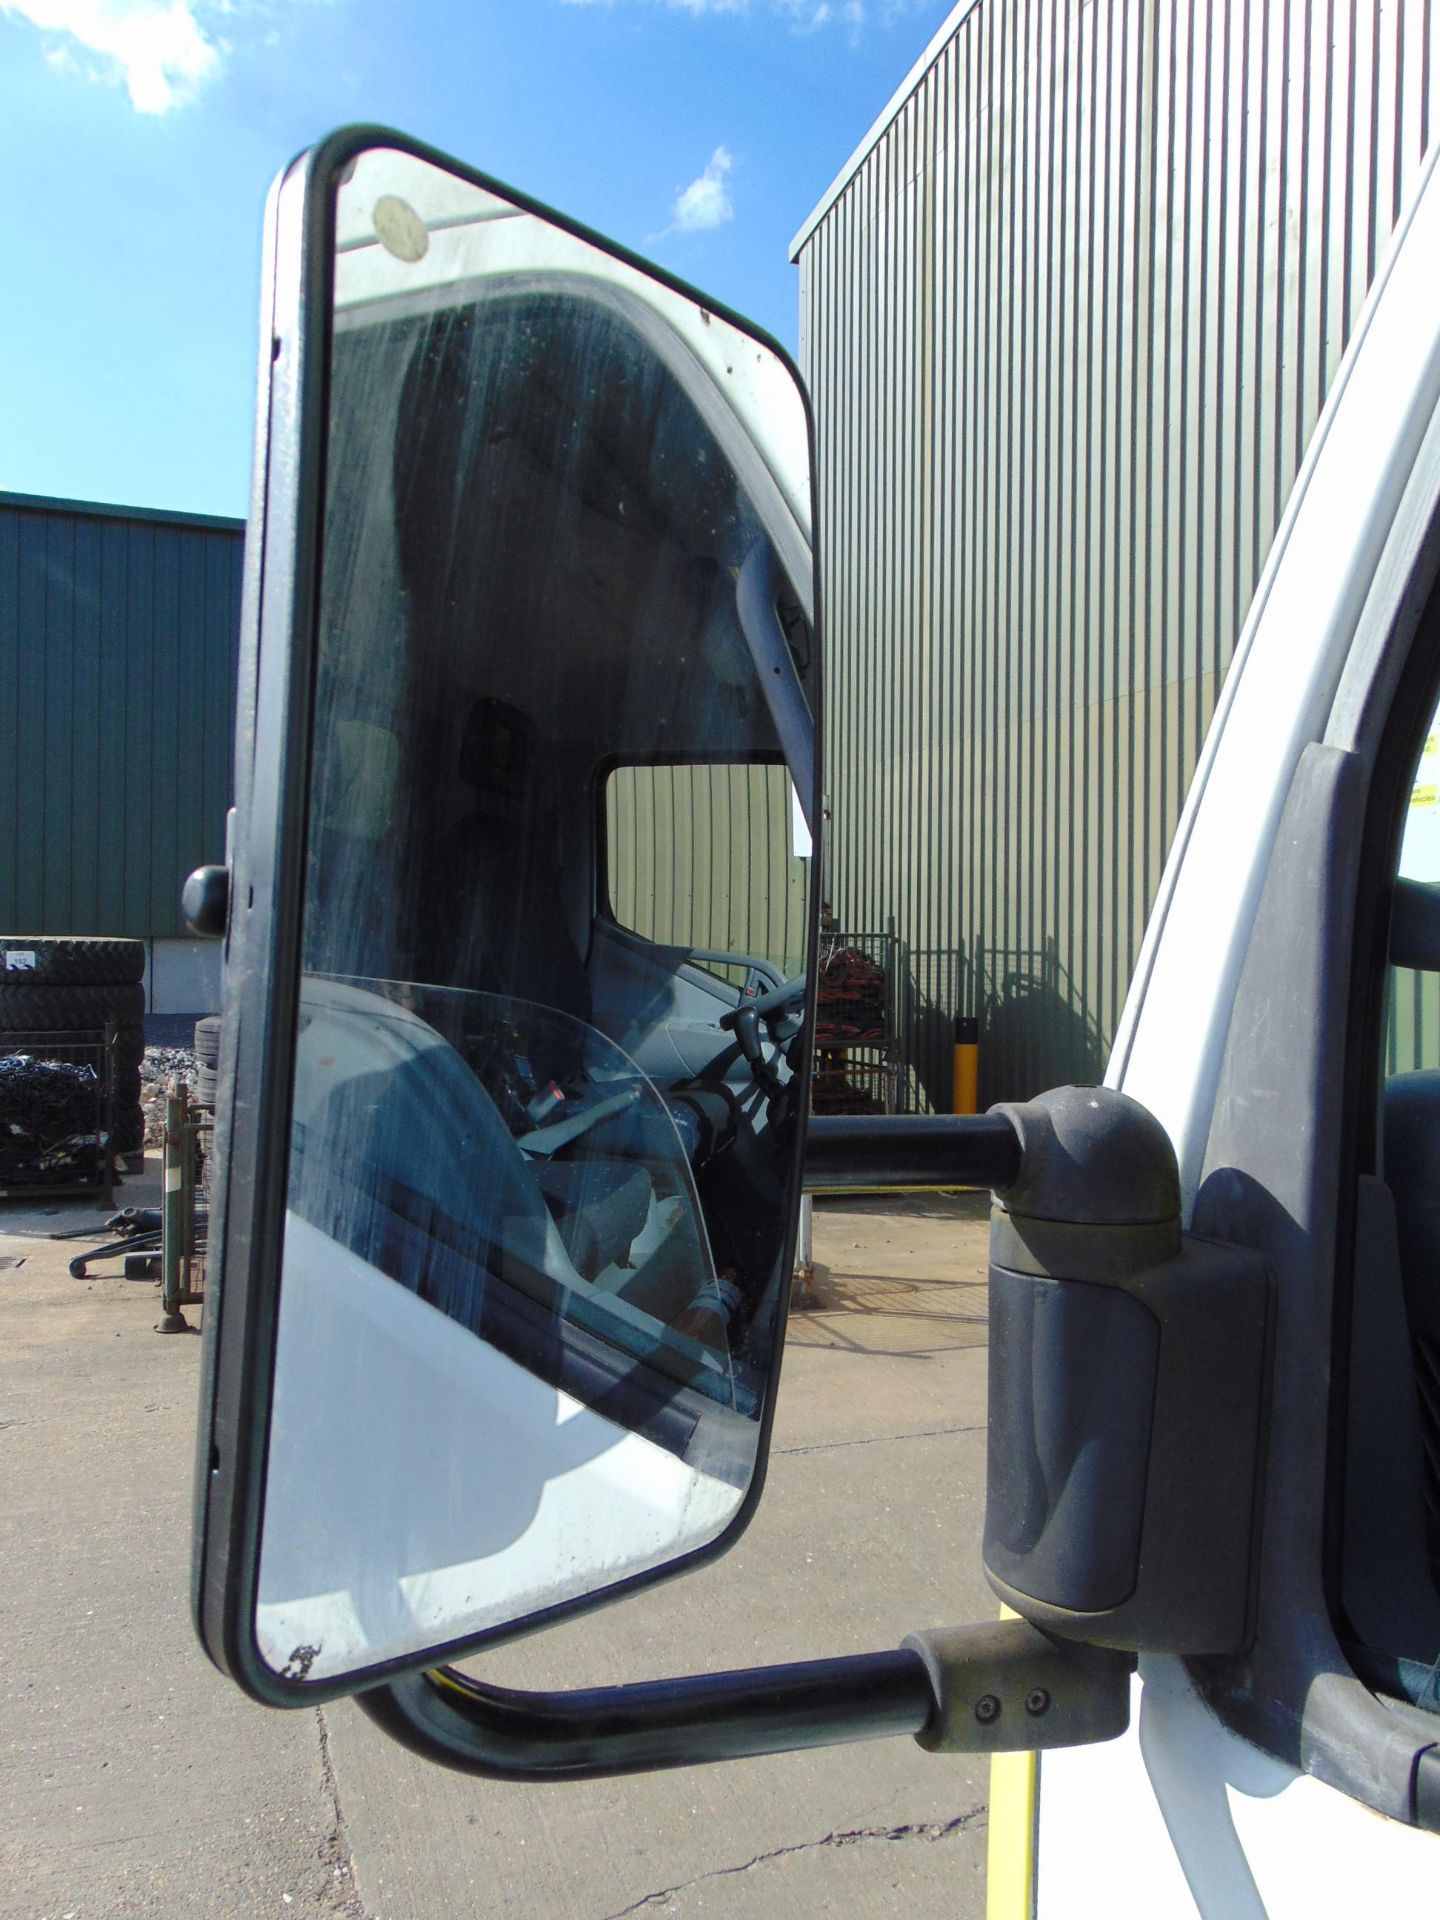 2011 Mitsubishi Fuso Canter Box lorry 7.5T - Only 5400 Miles! - Image 30 of 51